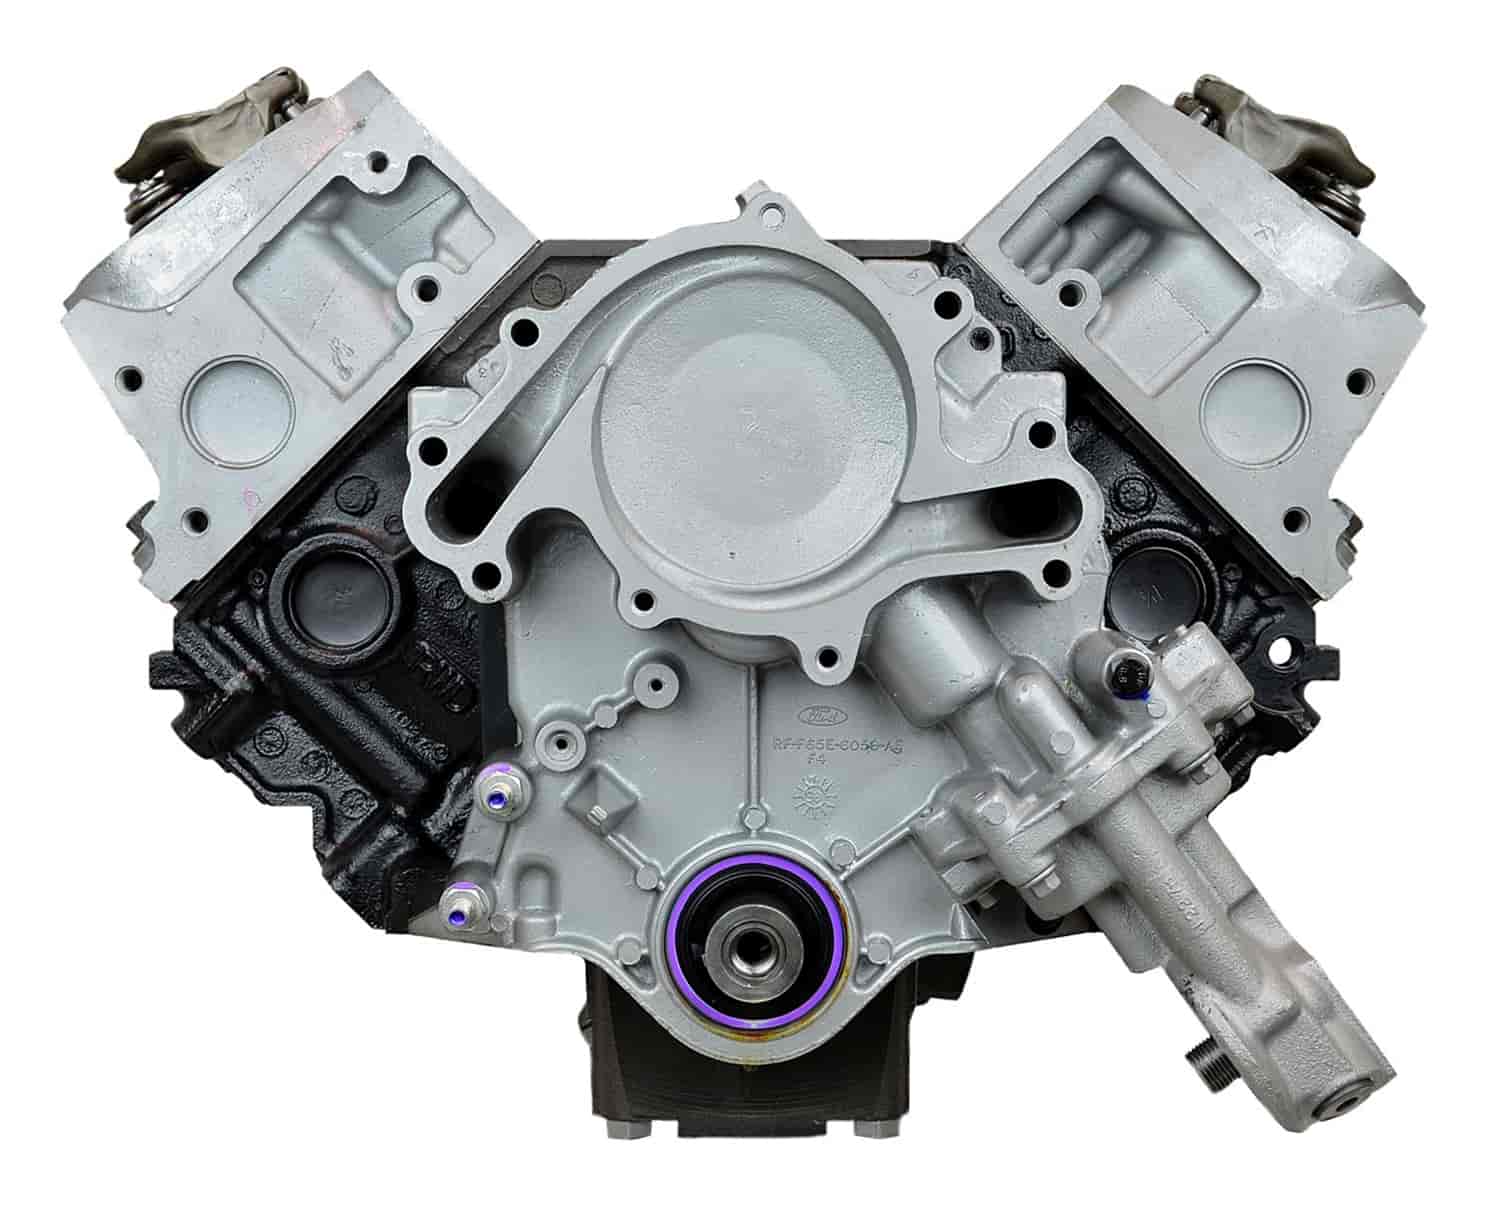 Remanufactured Crate Engine for 1999-2000 Ford F-Series Truck & E-Series Van with 4.2L V6